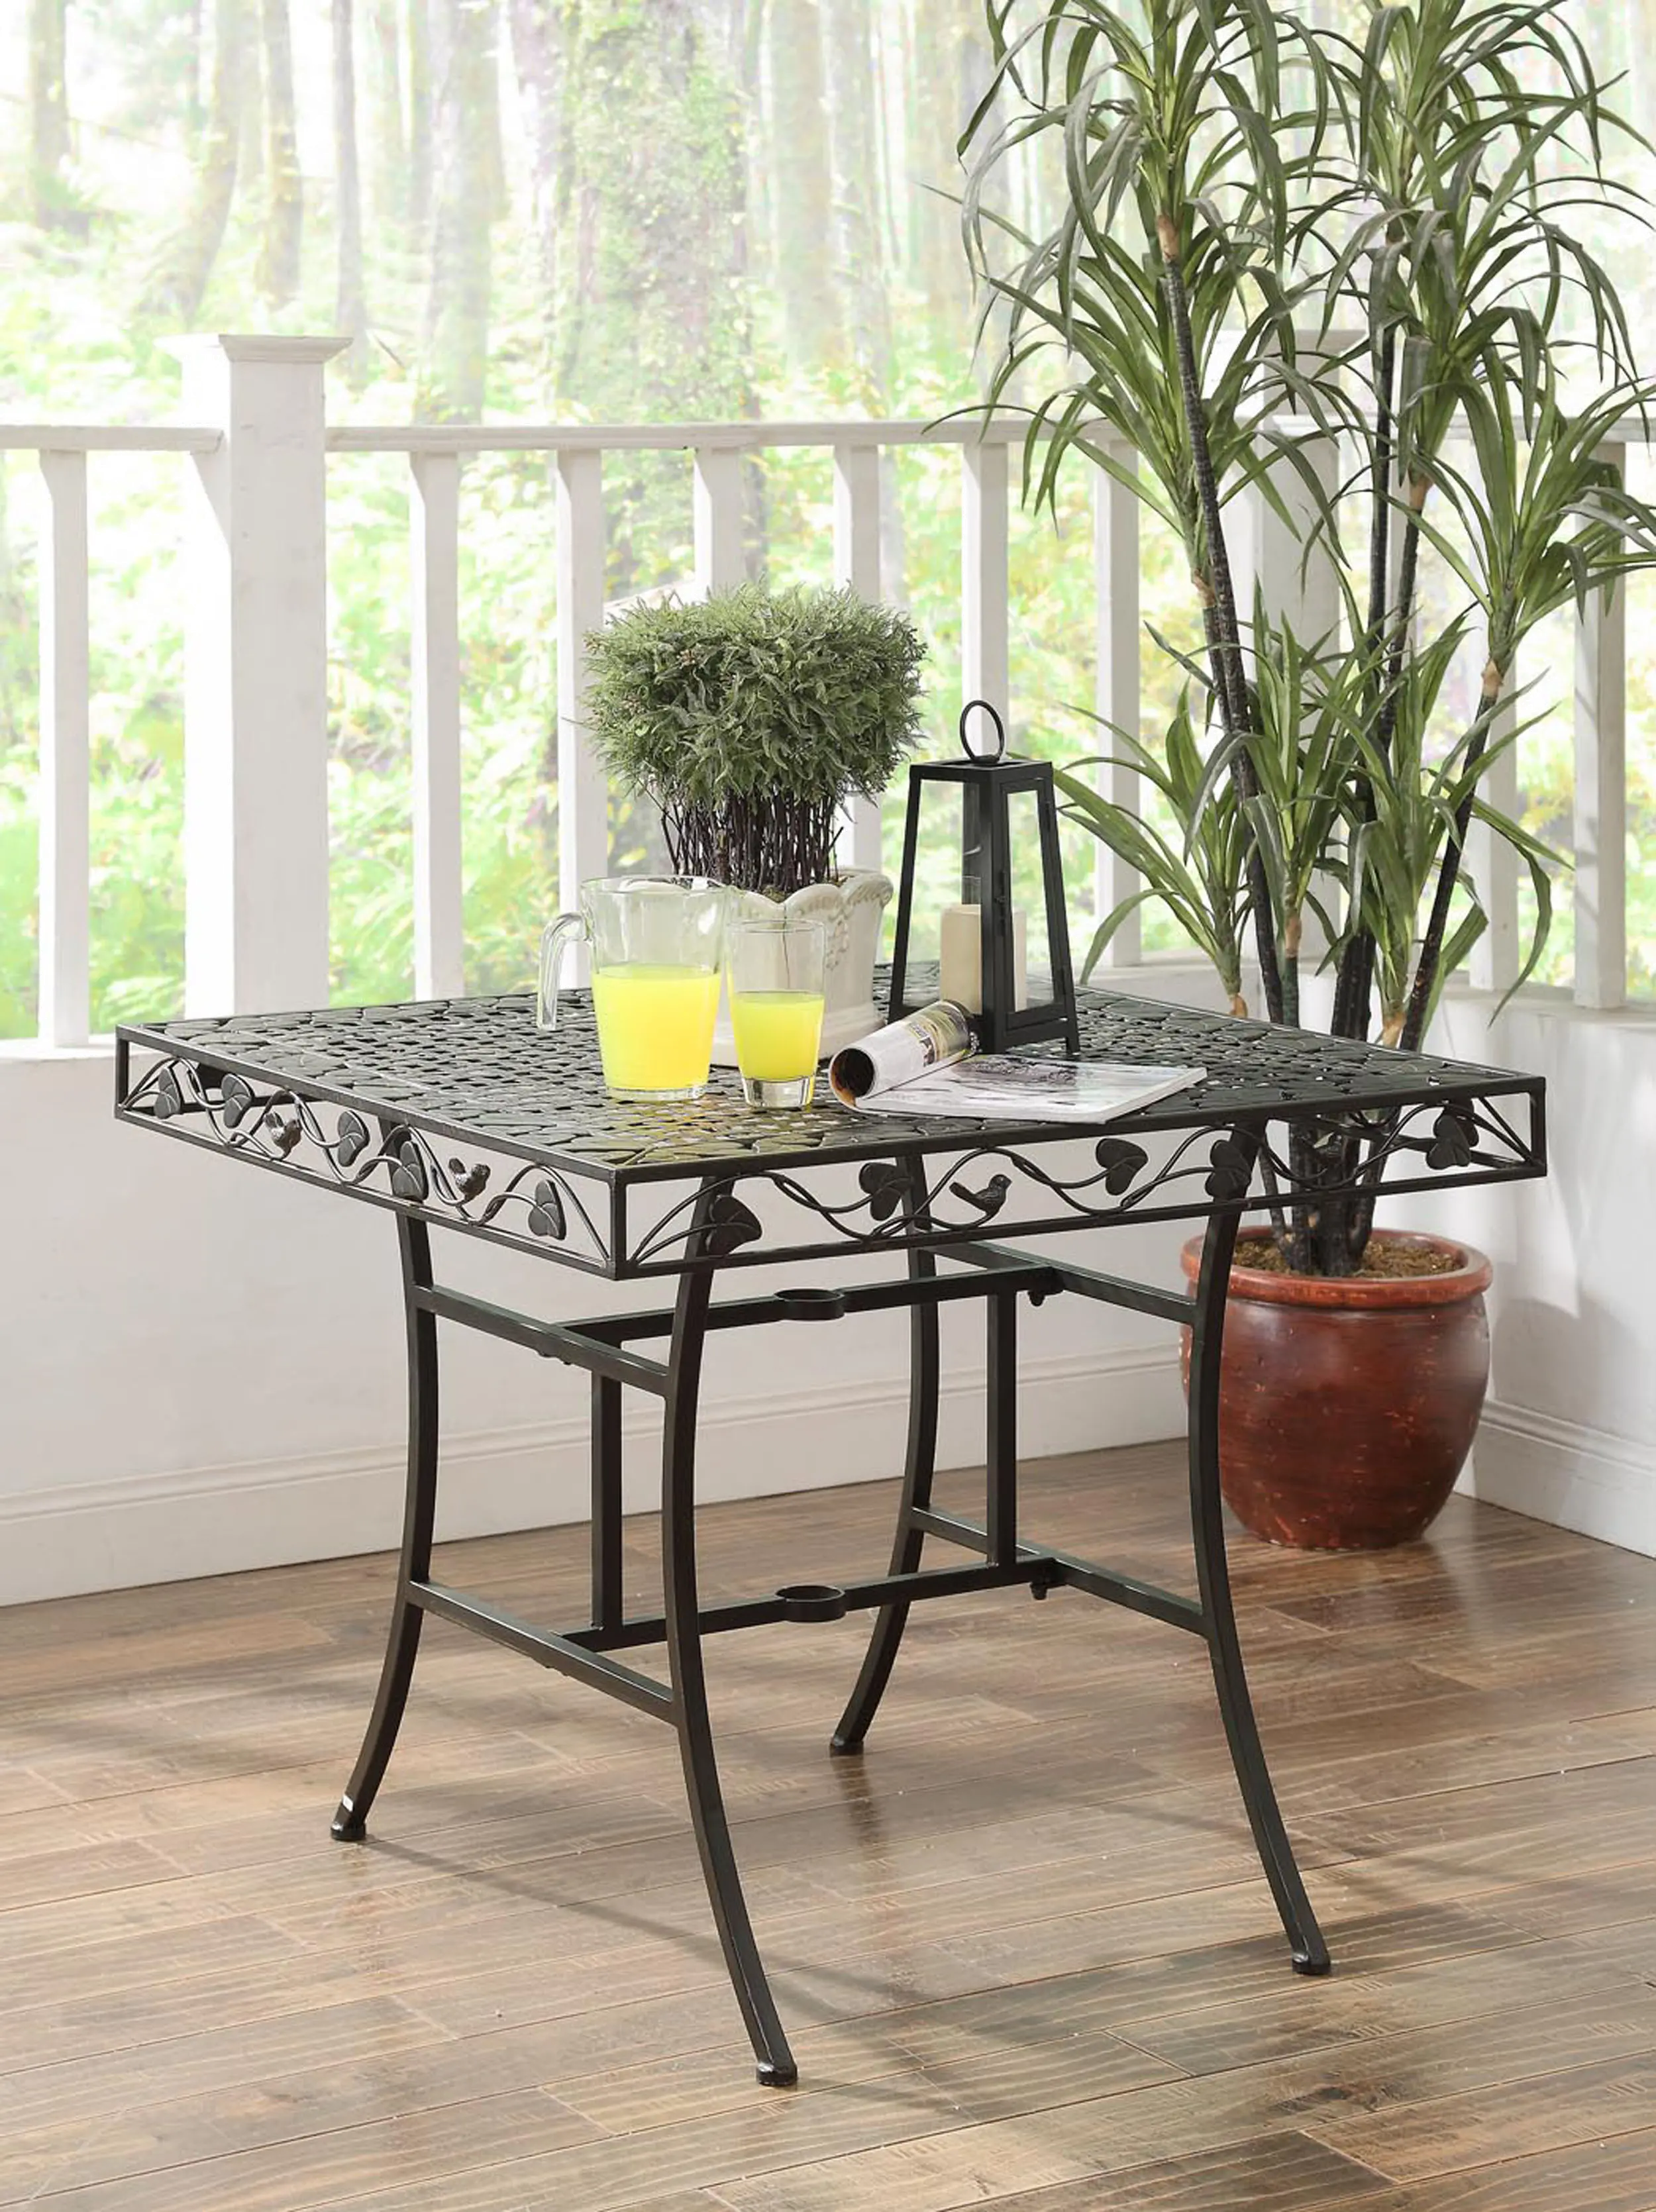 Metal Square Outdoor Patio Table - Ivy League